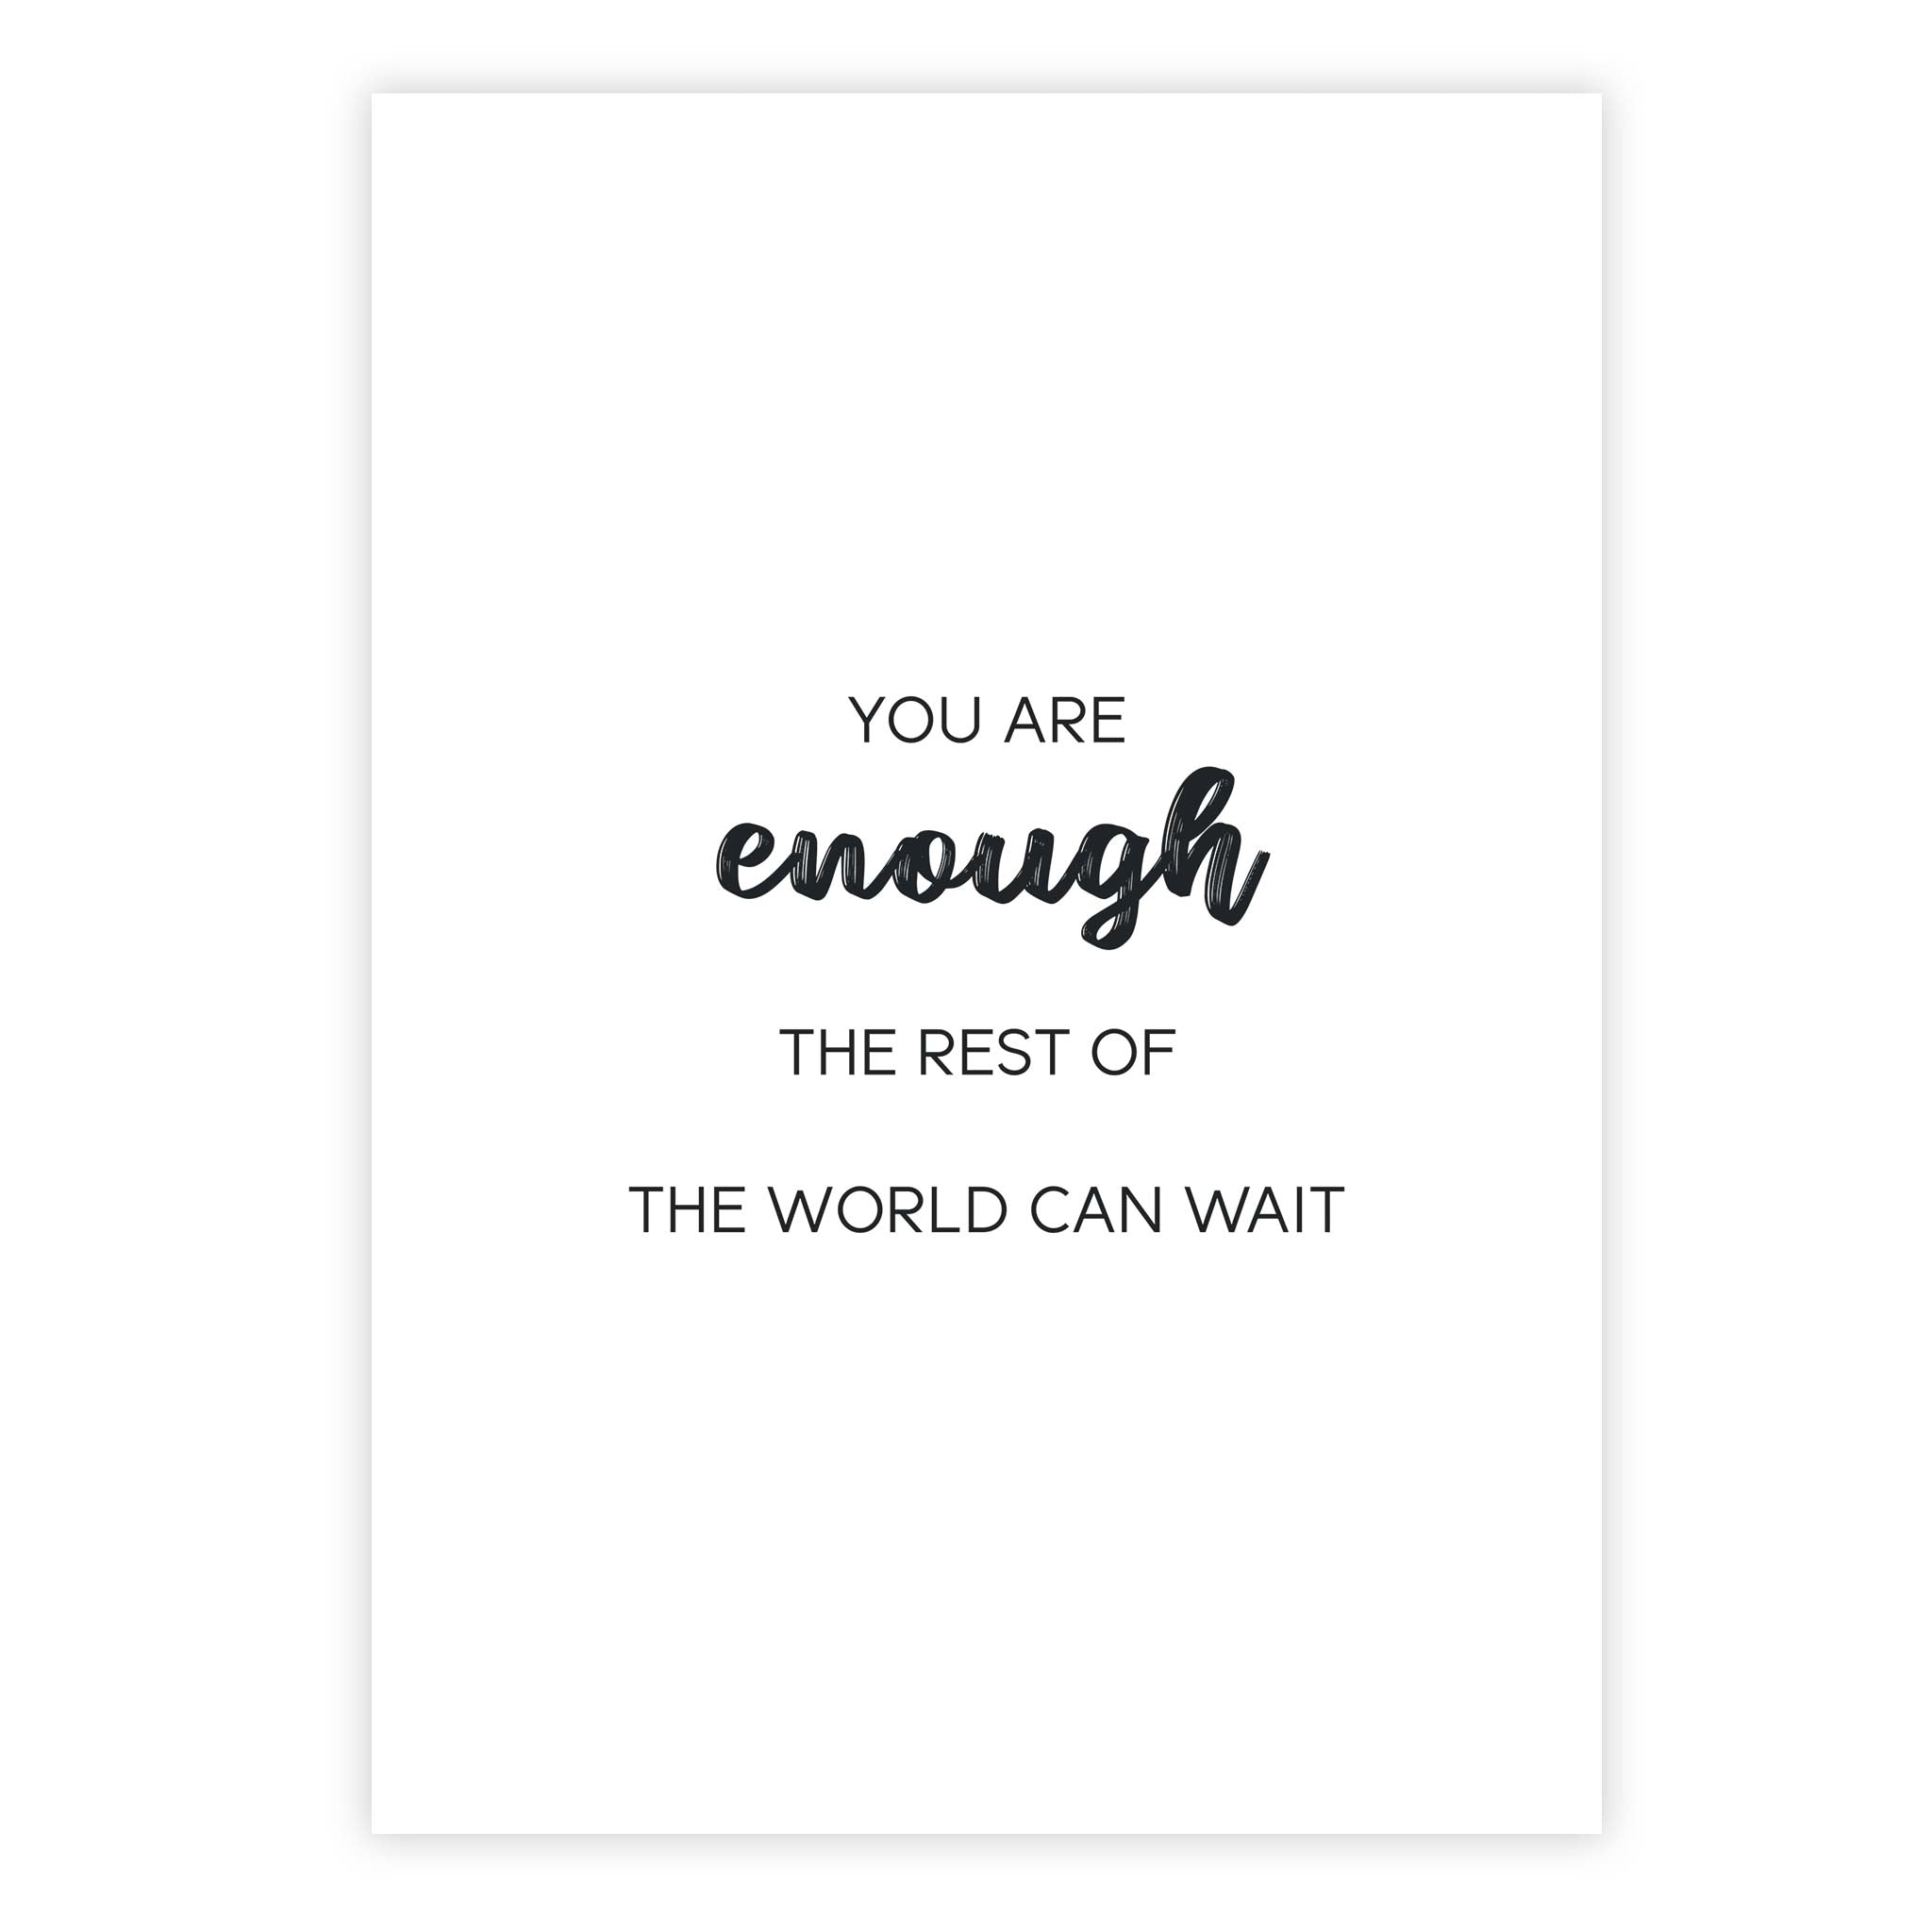 You are enough, the rest of the world can wait